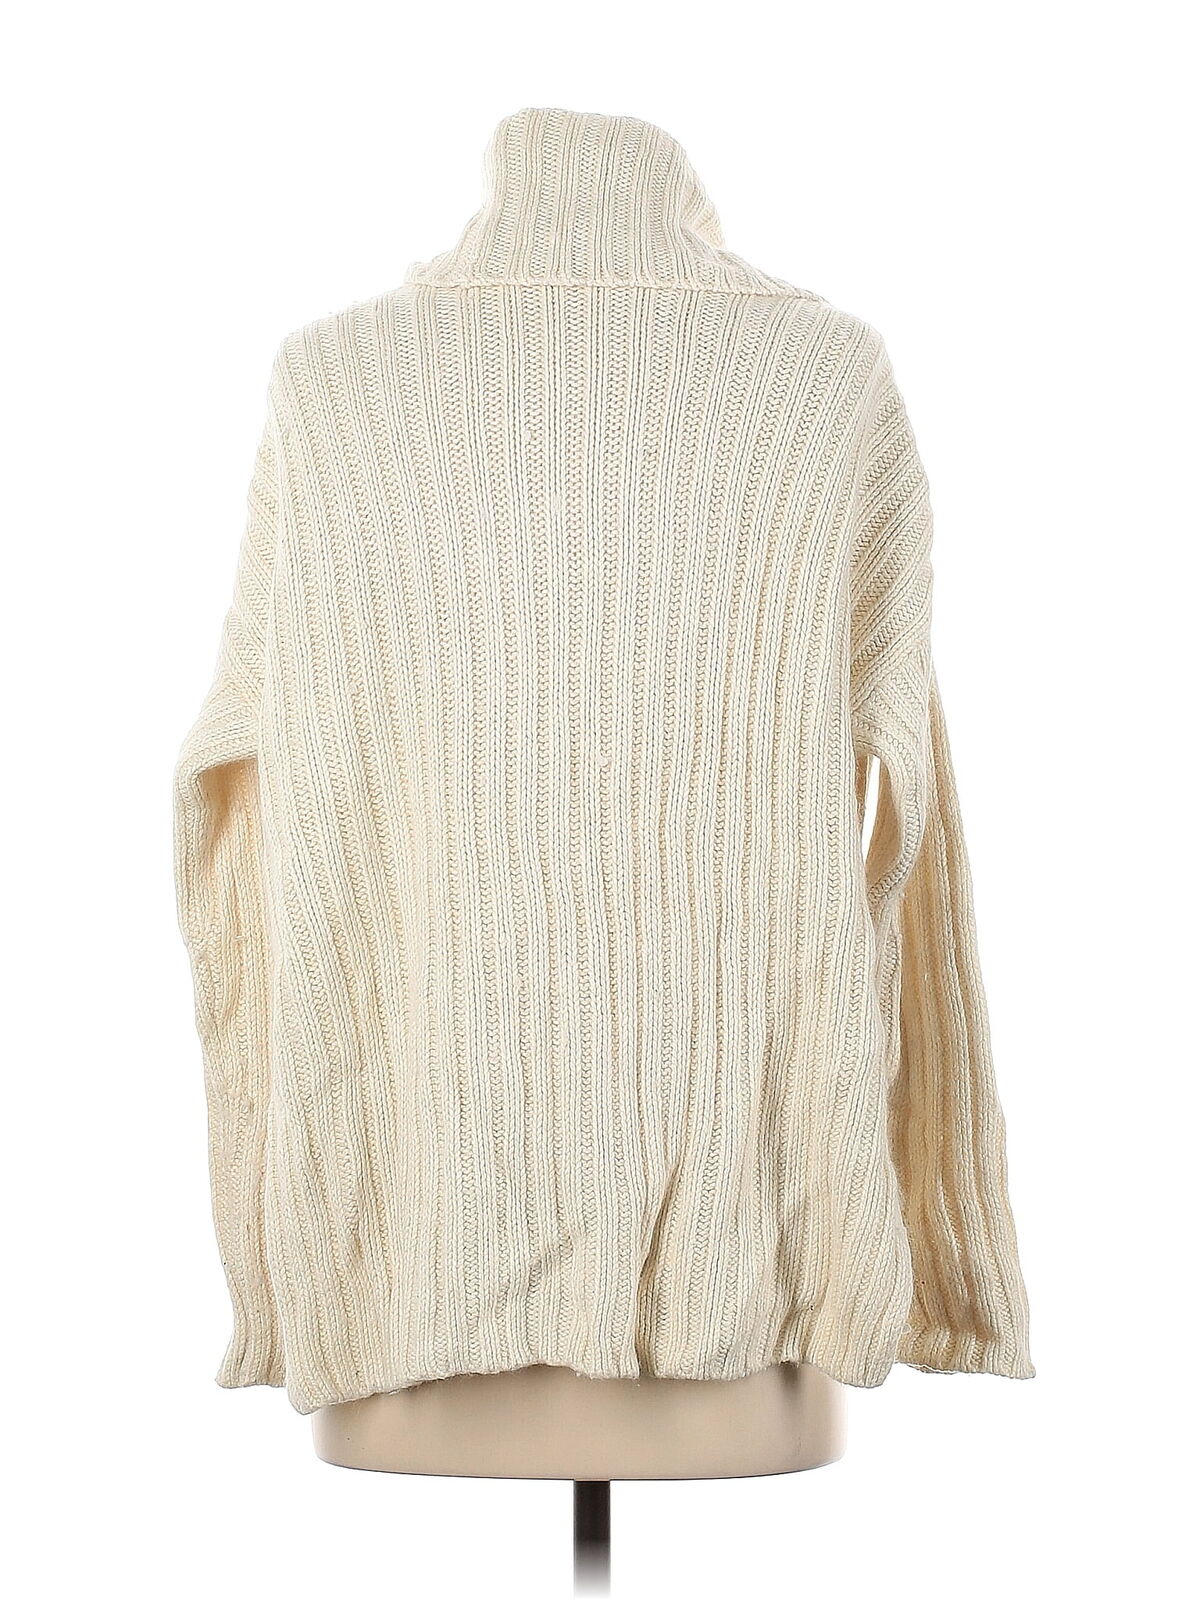 Ann Taylor Women Ivory Pullover Sweater XS - image 2